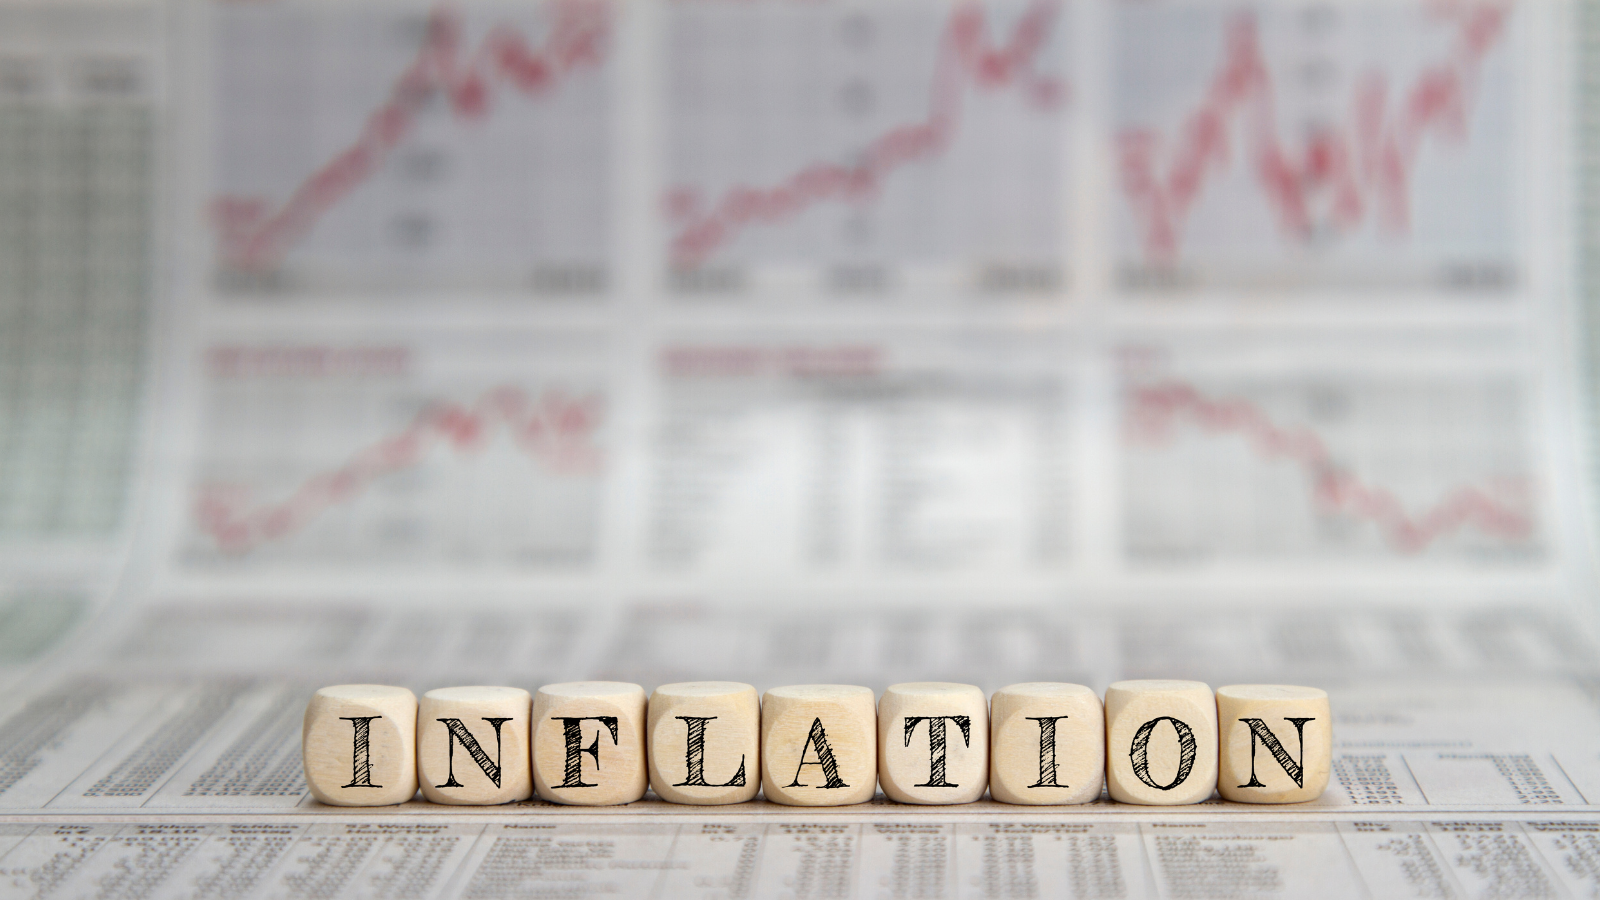 OPEC+ Drive Inflation Fears